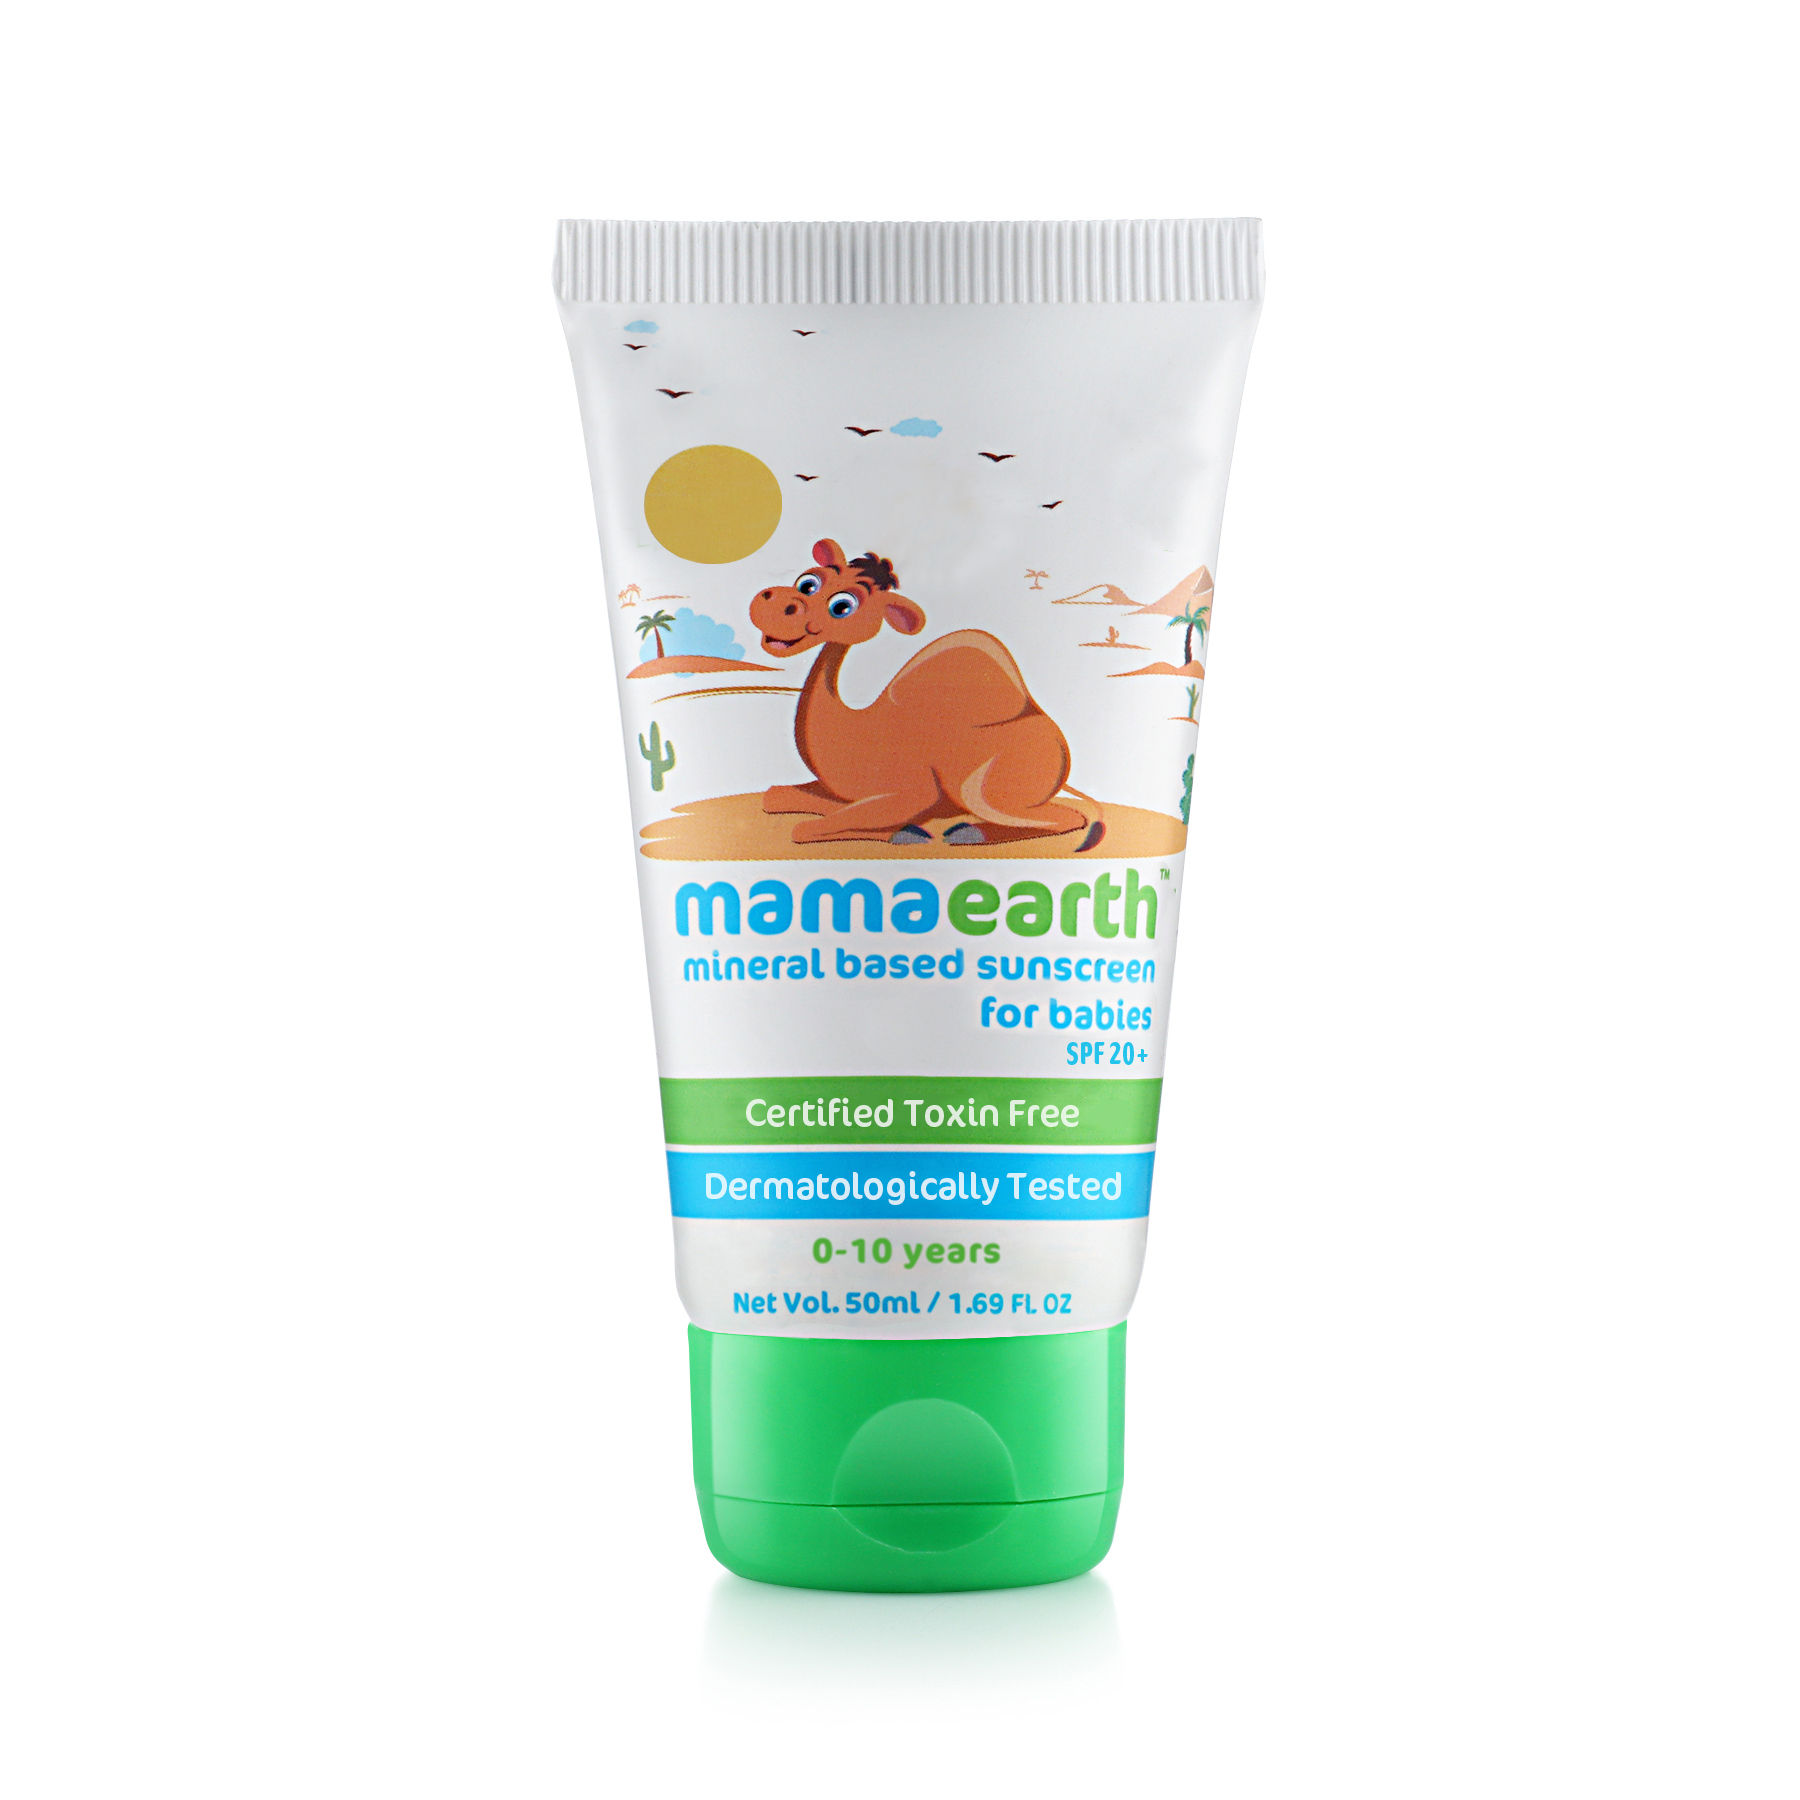 Mamaearth Mineral Based Sunscreen For Babies SPF20+